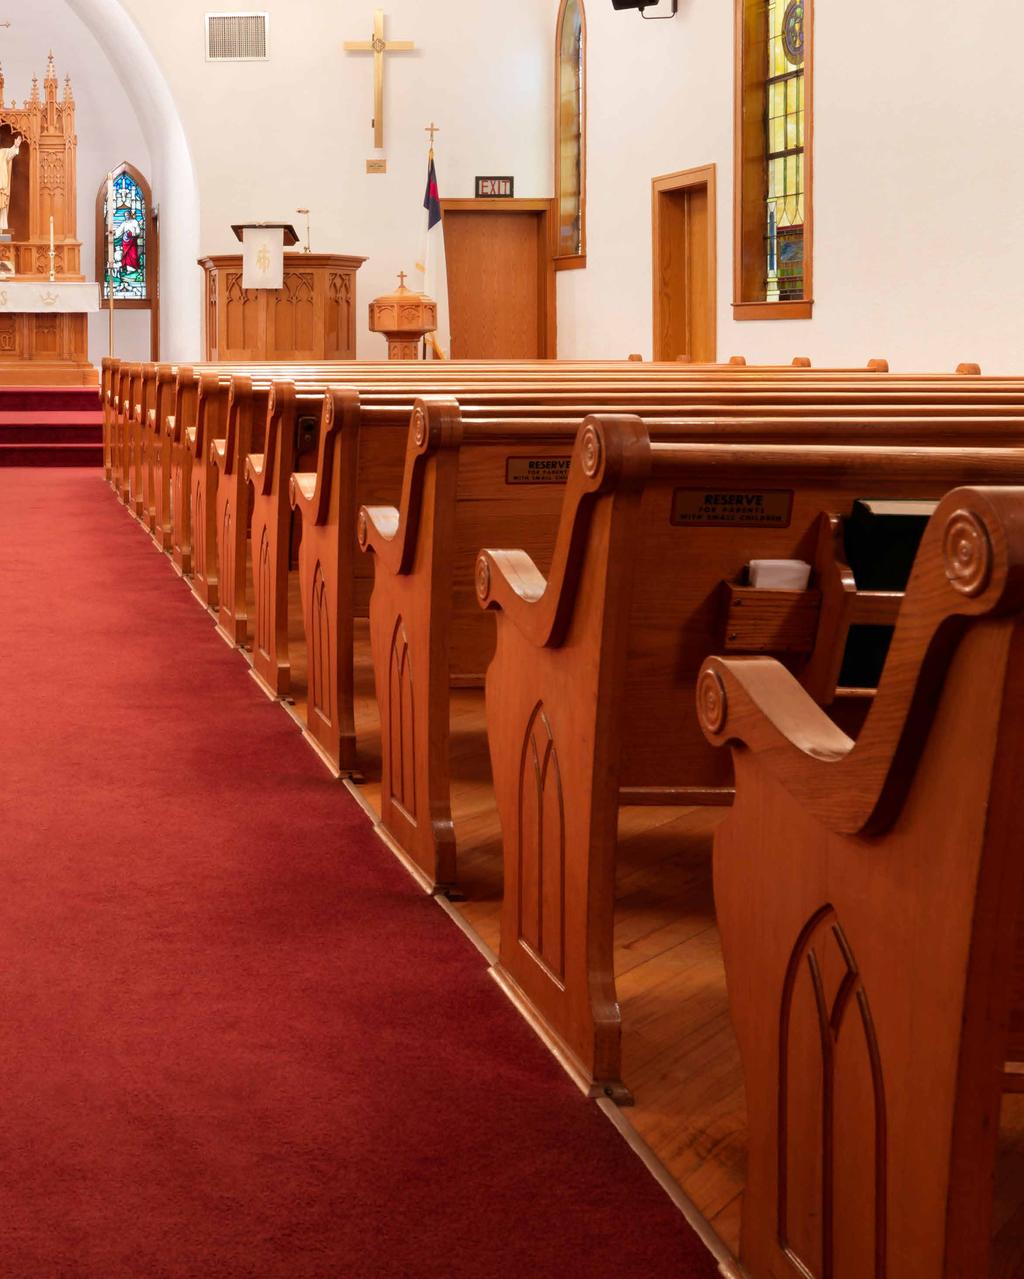 In 1934, a congregation from Defiance Ohio met with Erie Sauder, a local woodworker, to discuss wood furnishings for their newly renovated worship environment.